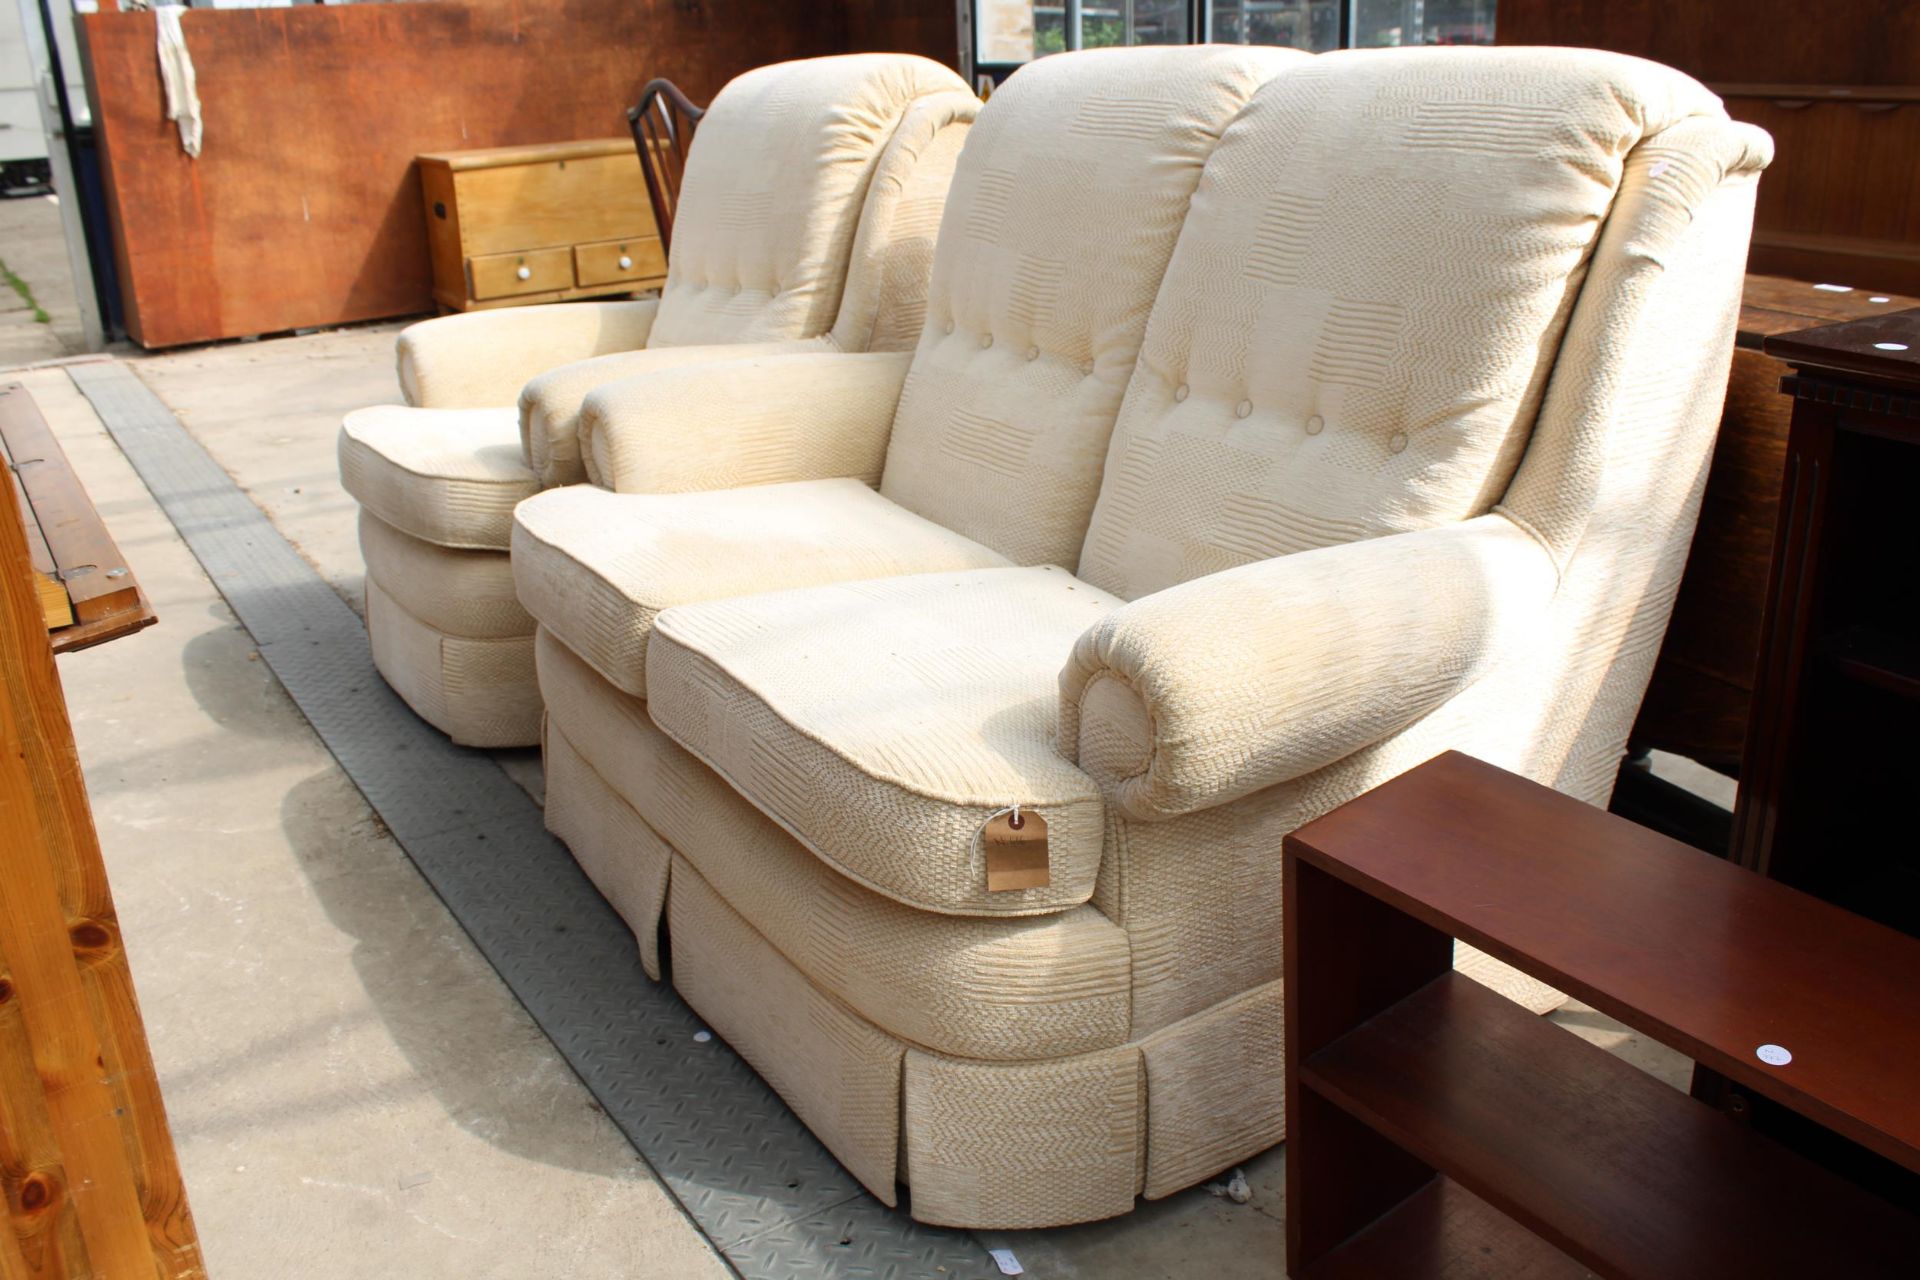 A MODERN G.PLAN TWO SEATER SETTEE AND MATCHING EASY CHAIR - Image 3 of 3